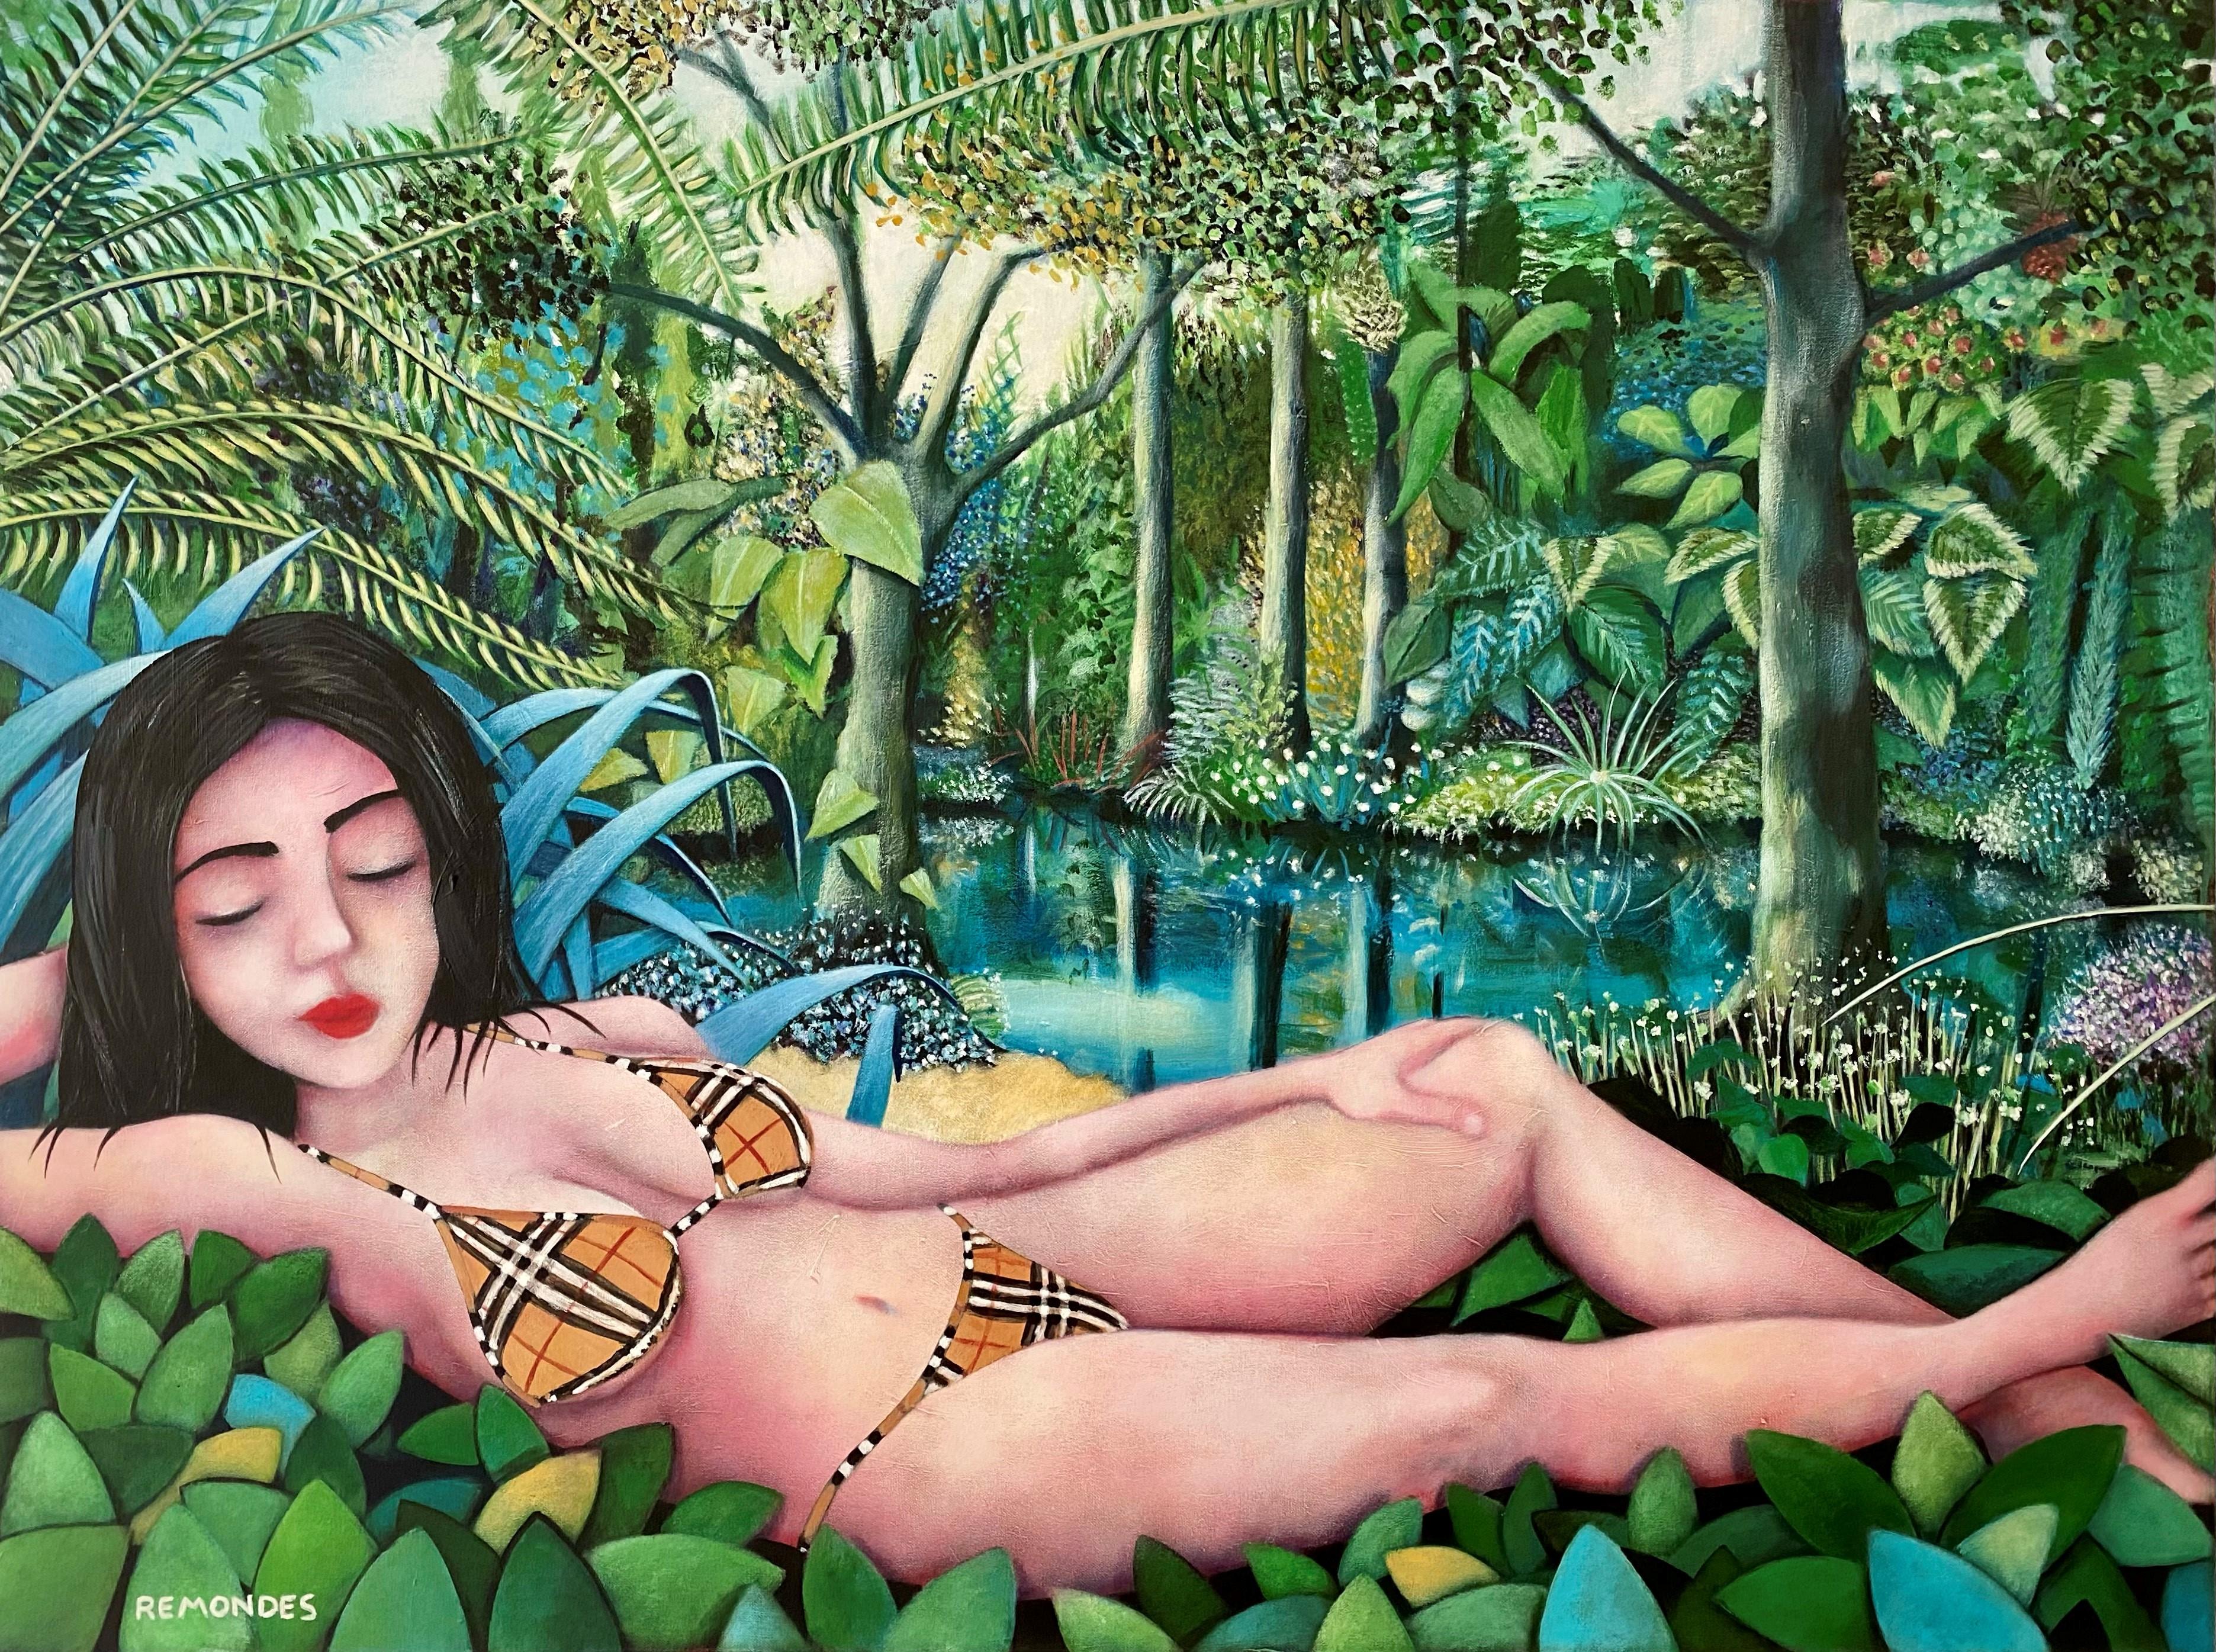 The Nymph of the Spring - Painting by Sérgio Remondes